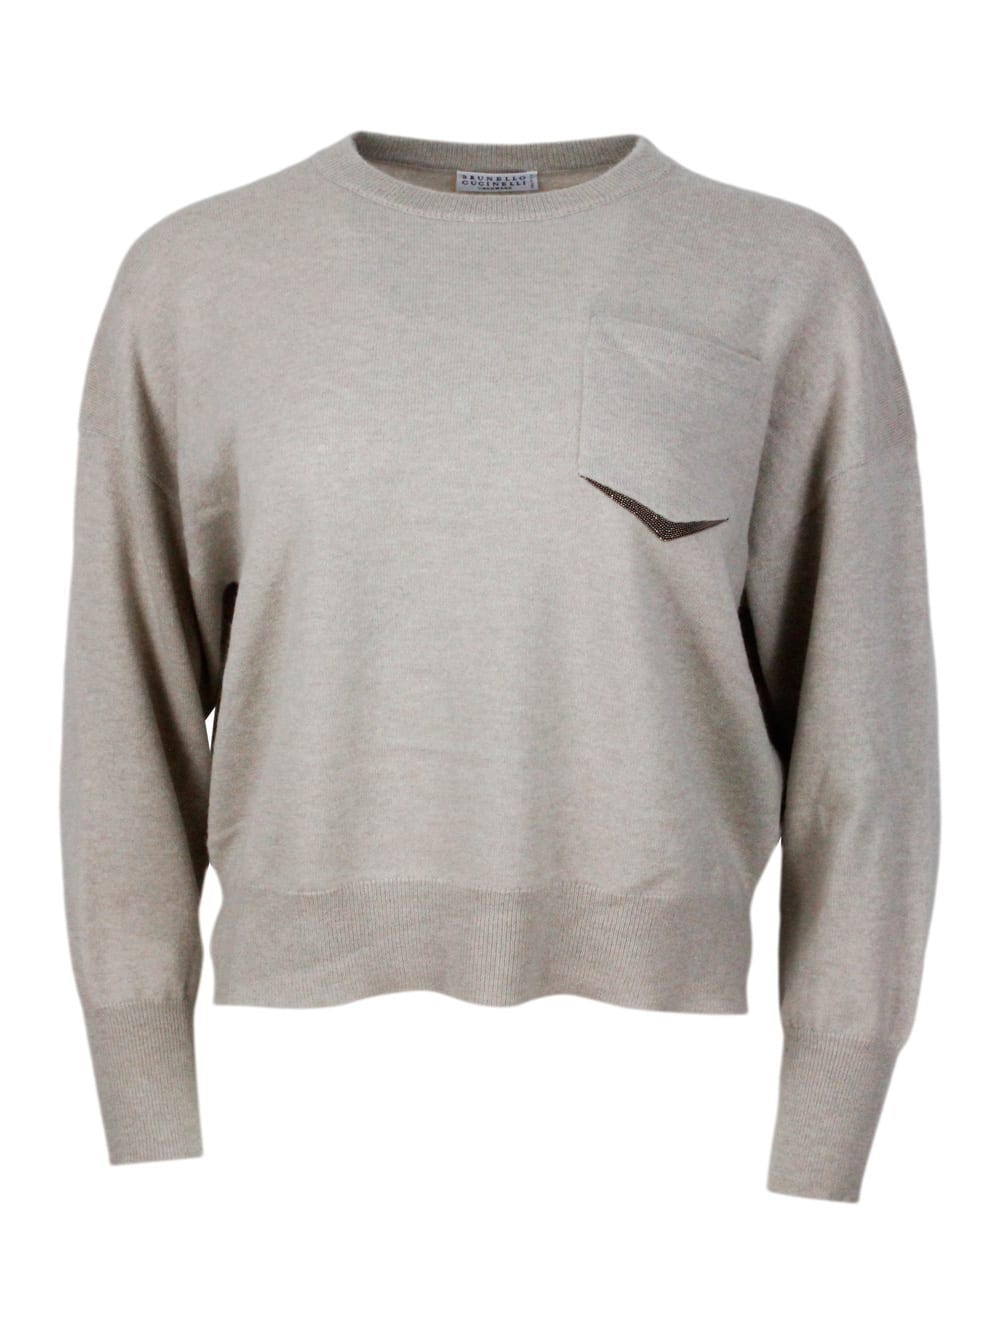 BRUNELLO CUCINELLI LONG-SLEEVED CREWNECK SWEATER IN FINE CASHMERE WITH A RELAXED AND SLIGHTLY CROPPED SHAPE. DETAILS IN